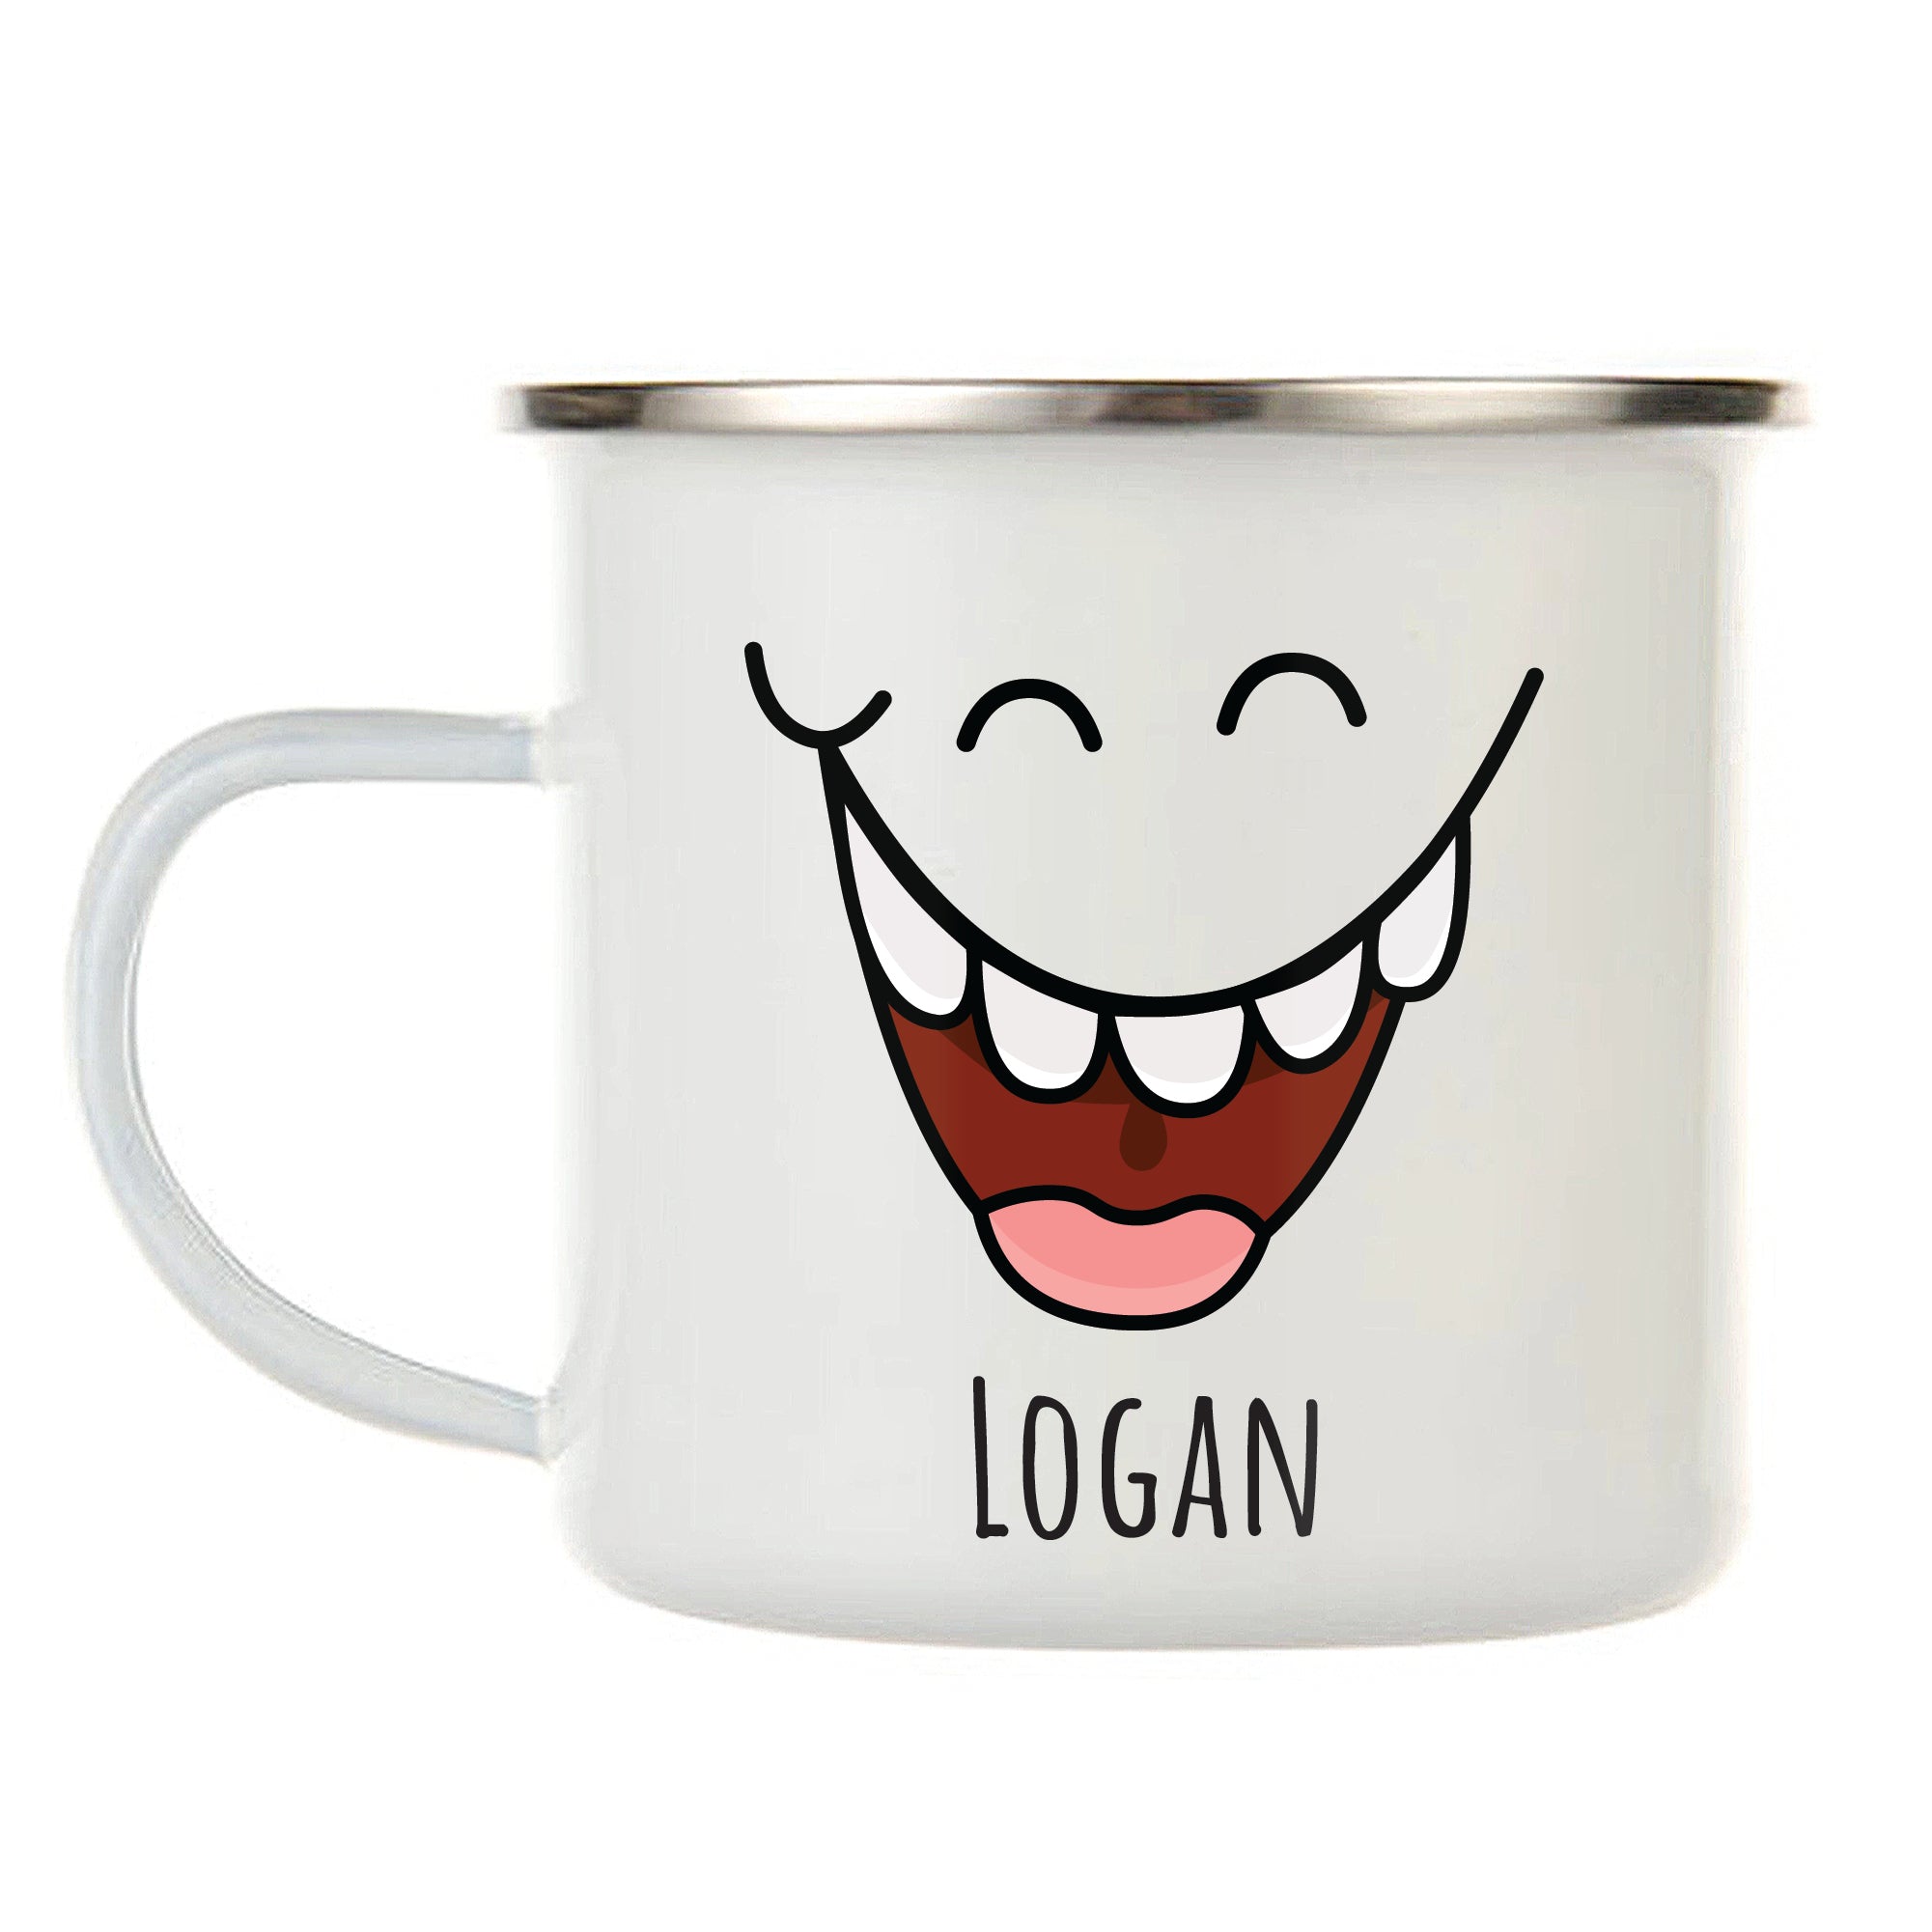 Kids Personalized 12 oz. Stainless Steel & Enamel Camp Mug with Silly Face